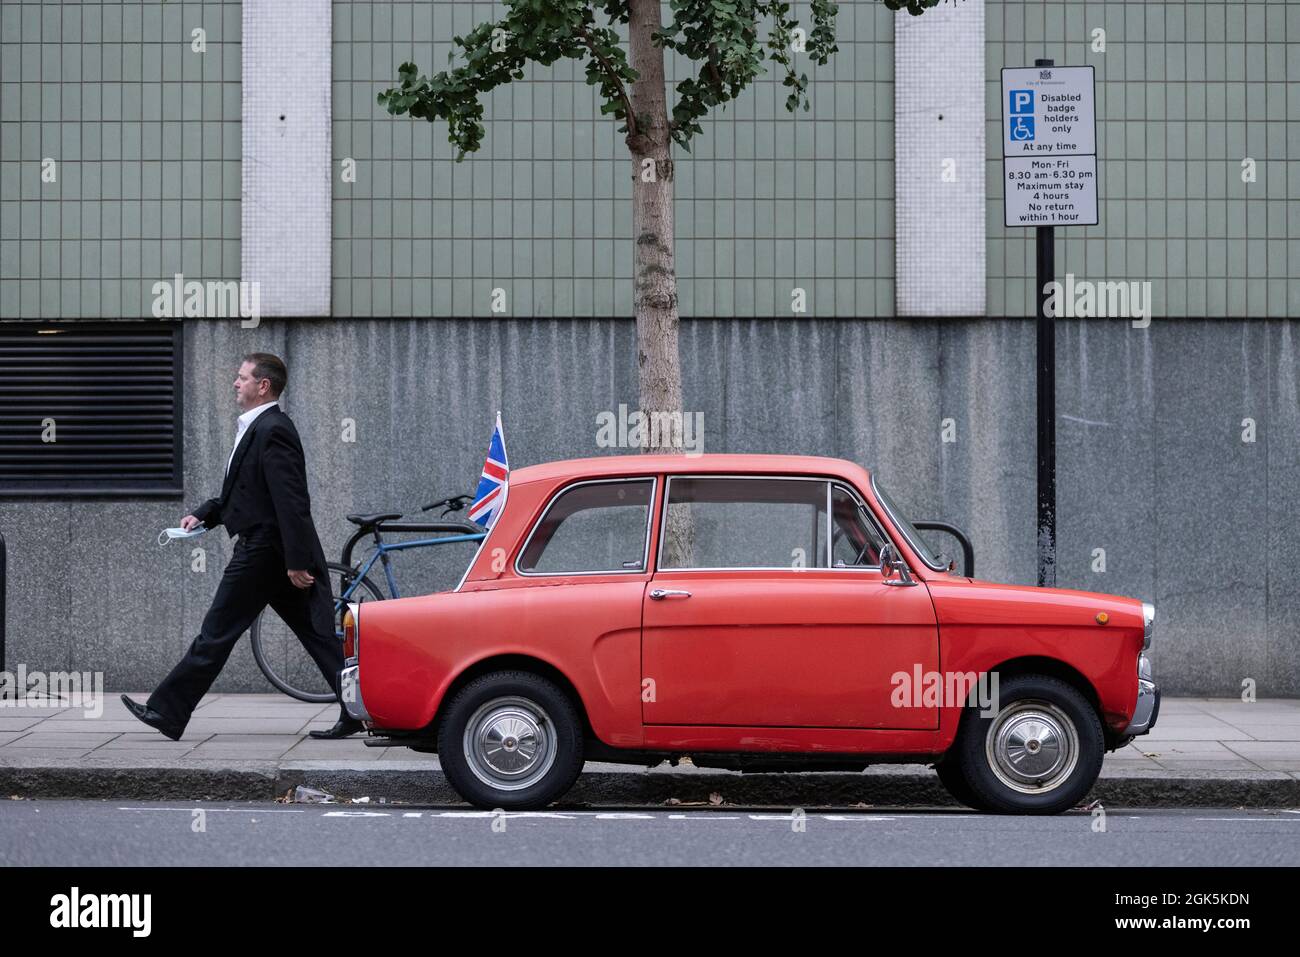 Hillman Imp, a small two-door economy car that was manufactured from 1963 to 1976, parked along the roadside in Kensington, central London, England, Uni Stock Photo